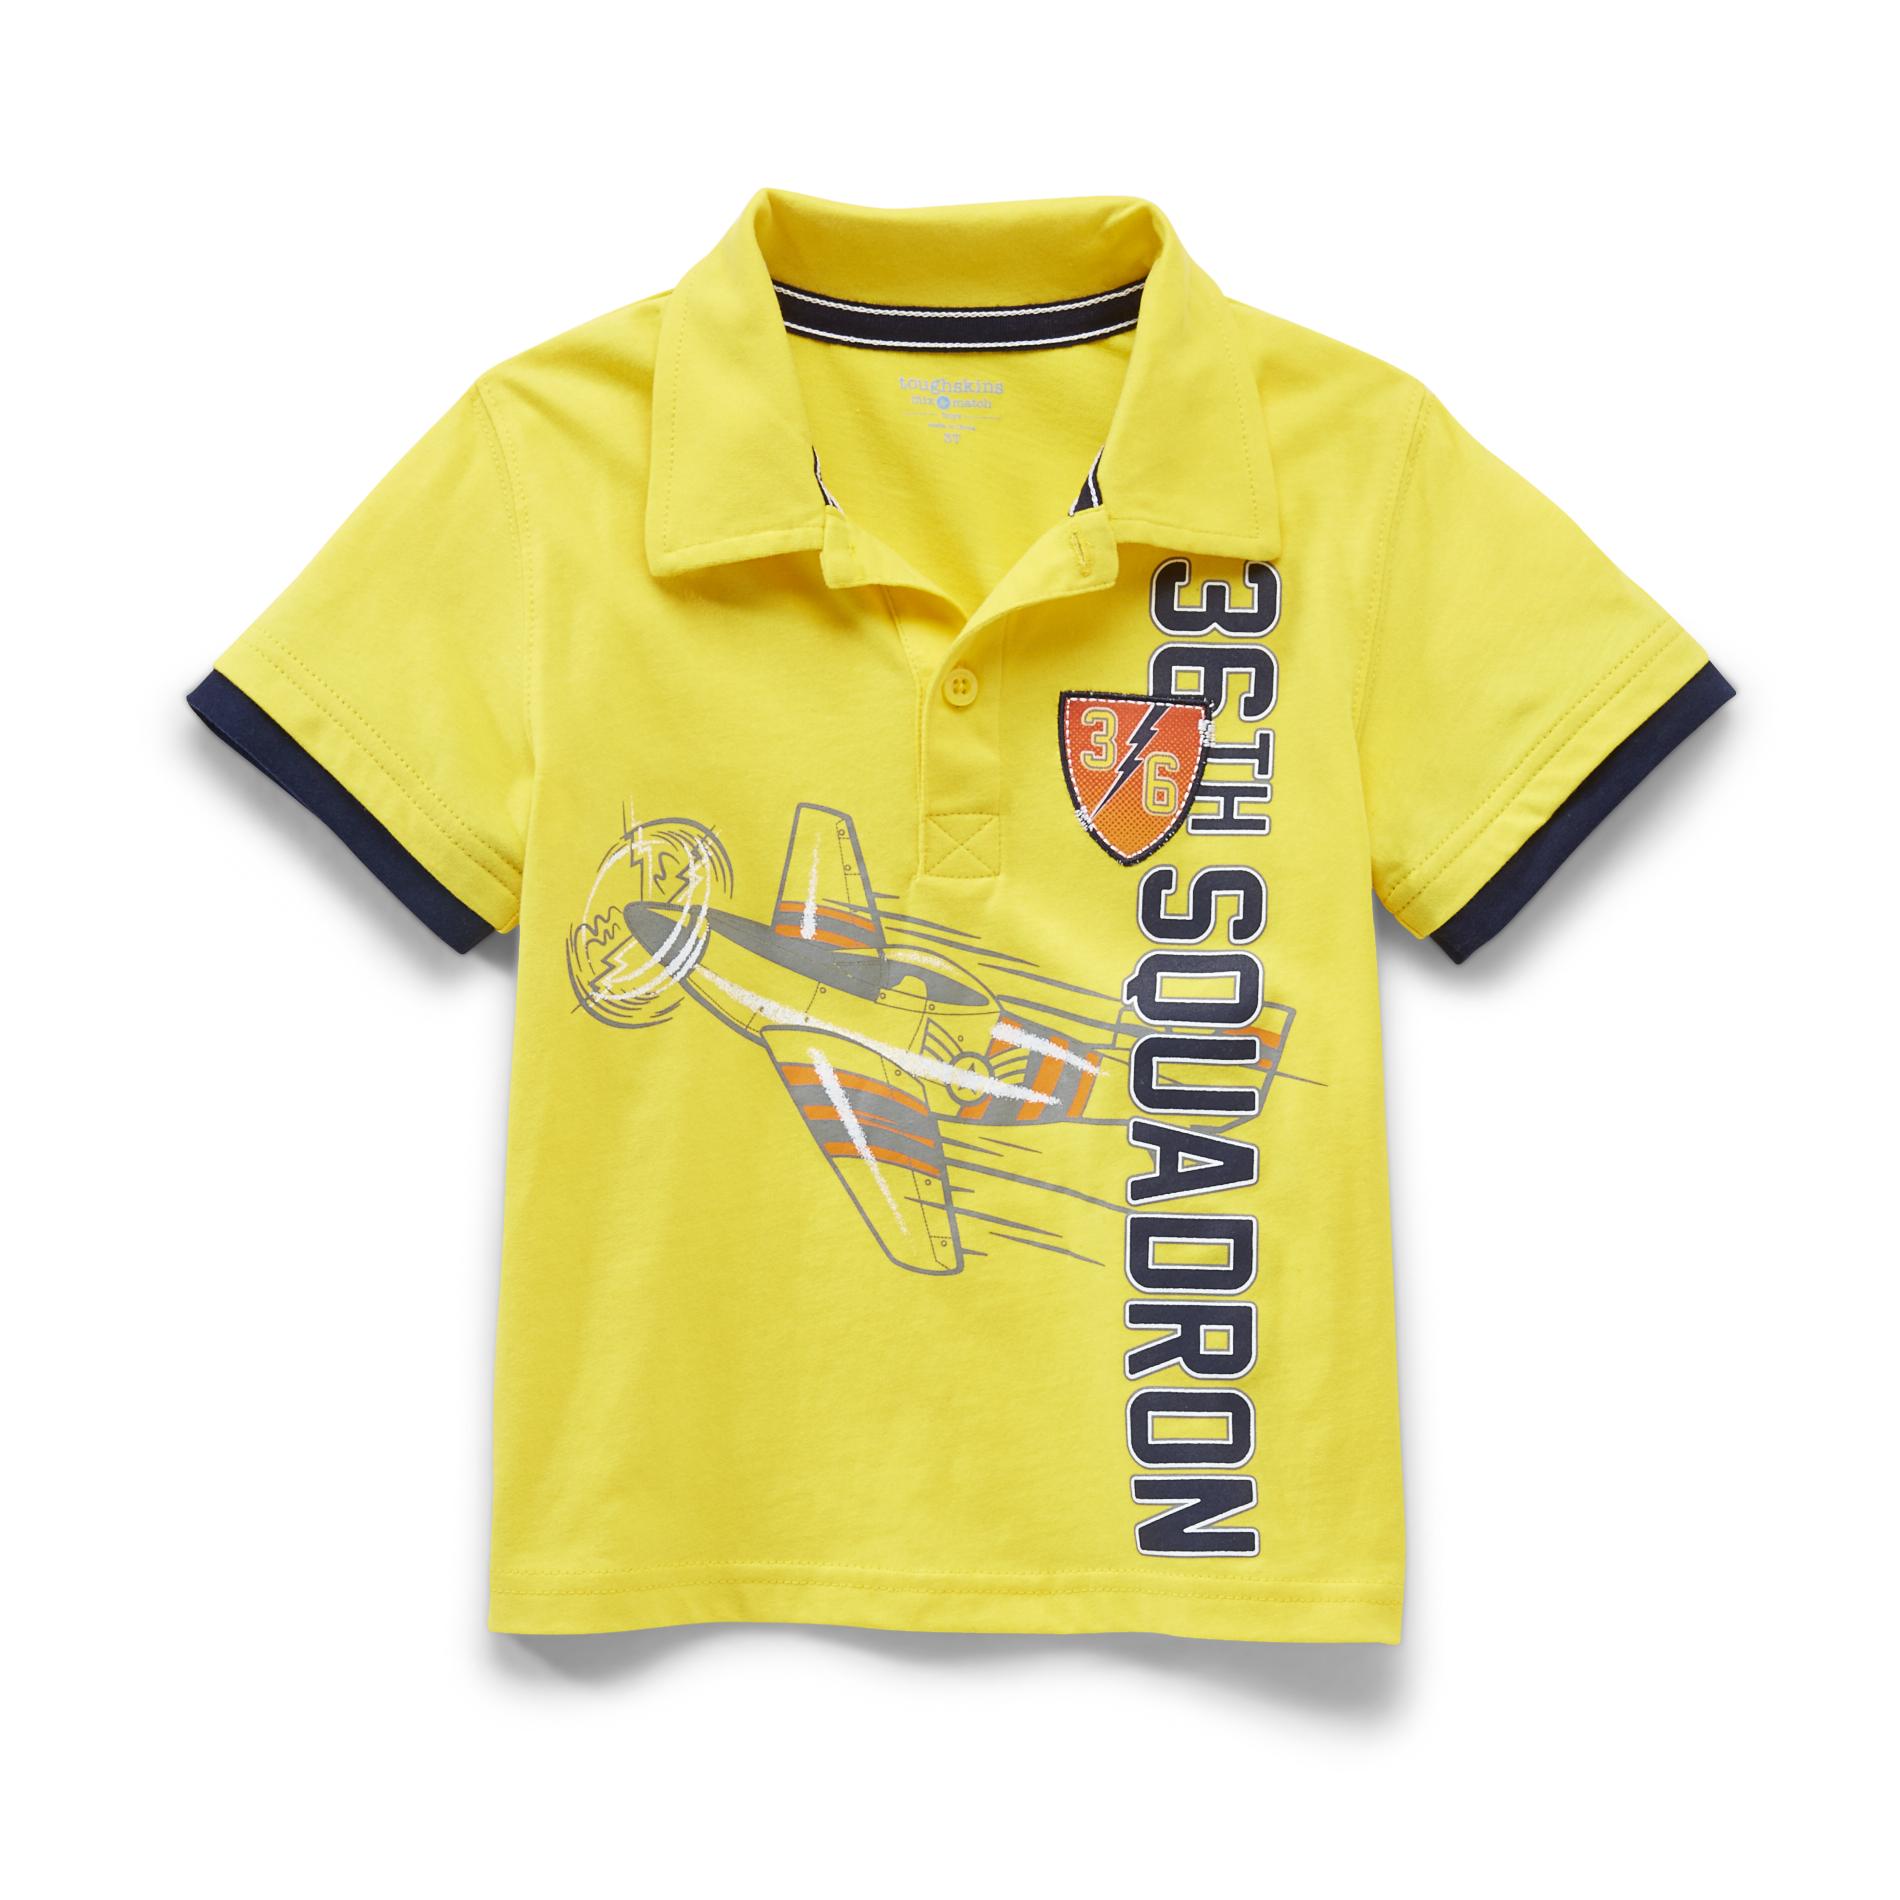 Toughskins Infant & Toddler Boy's Graphic Polo Shirt - Airplane